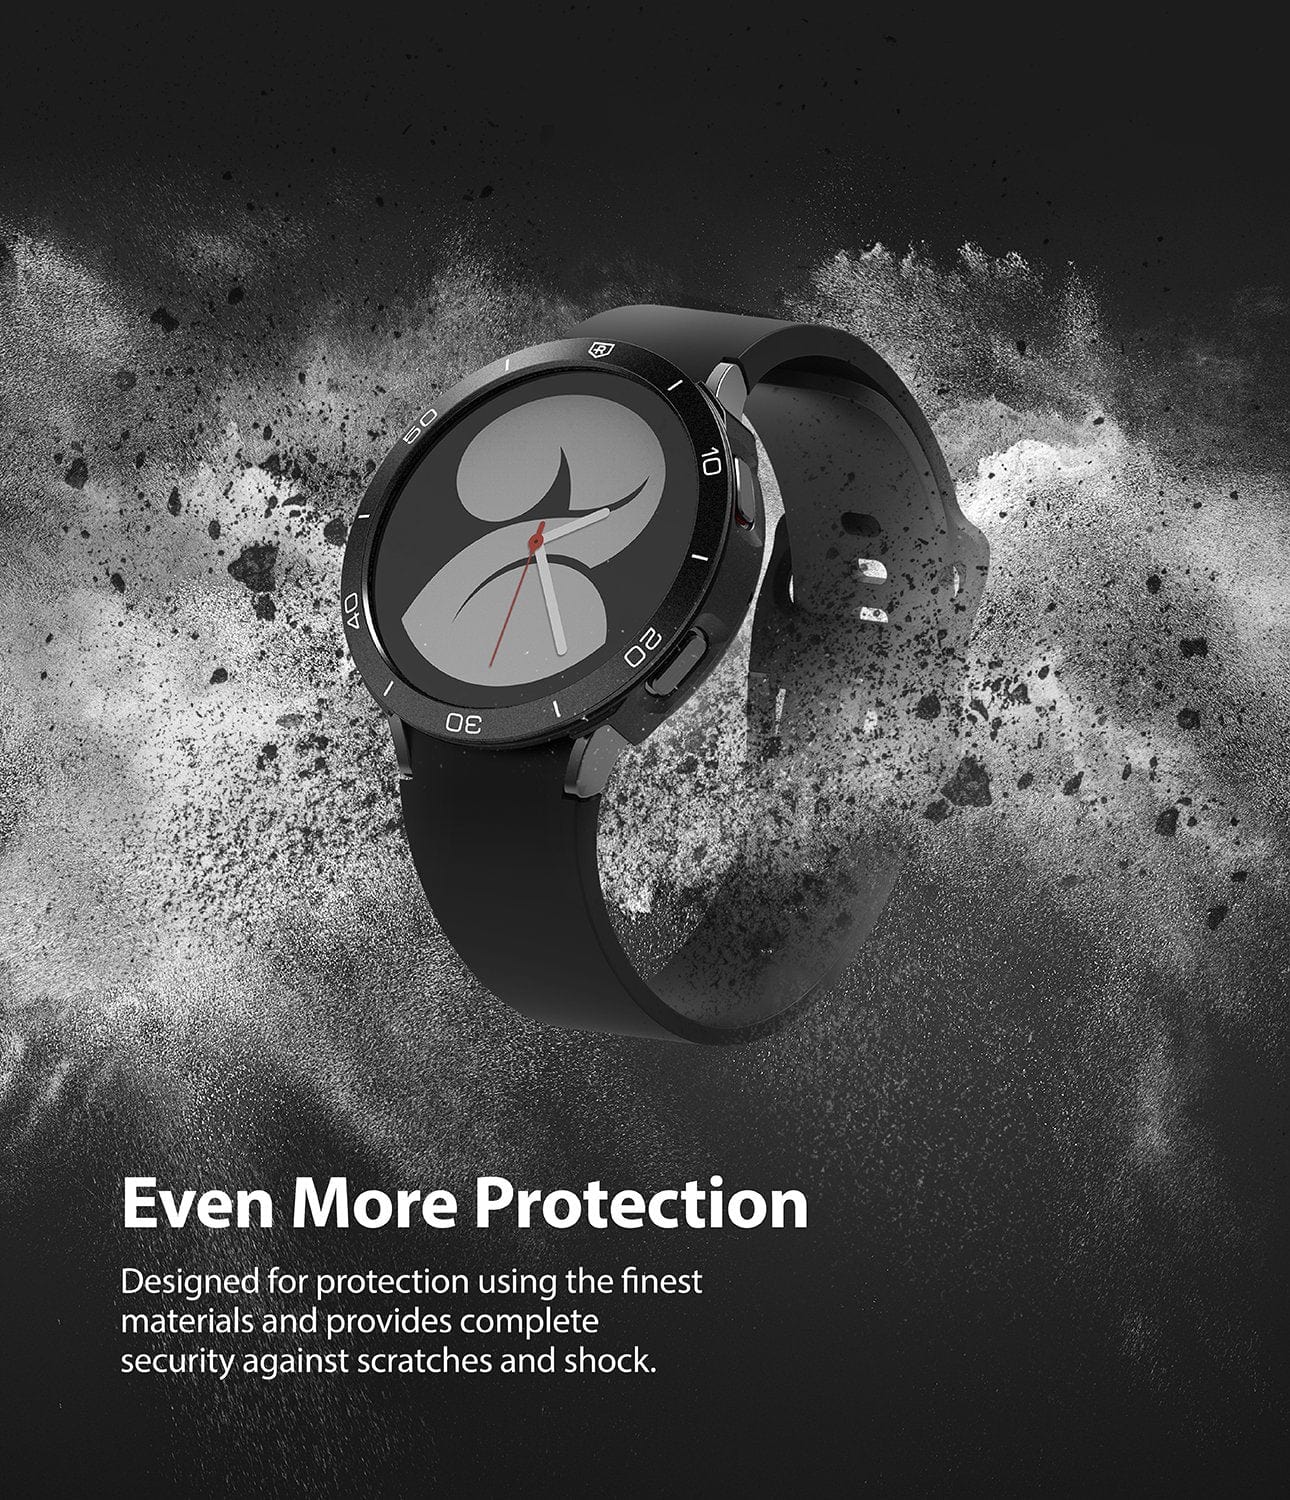 Crafted with top-quality materials, our design prioritizes protection and ensures complete security for your device.